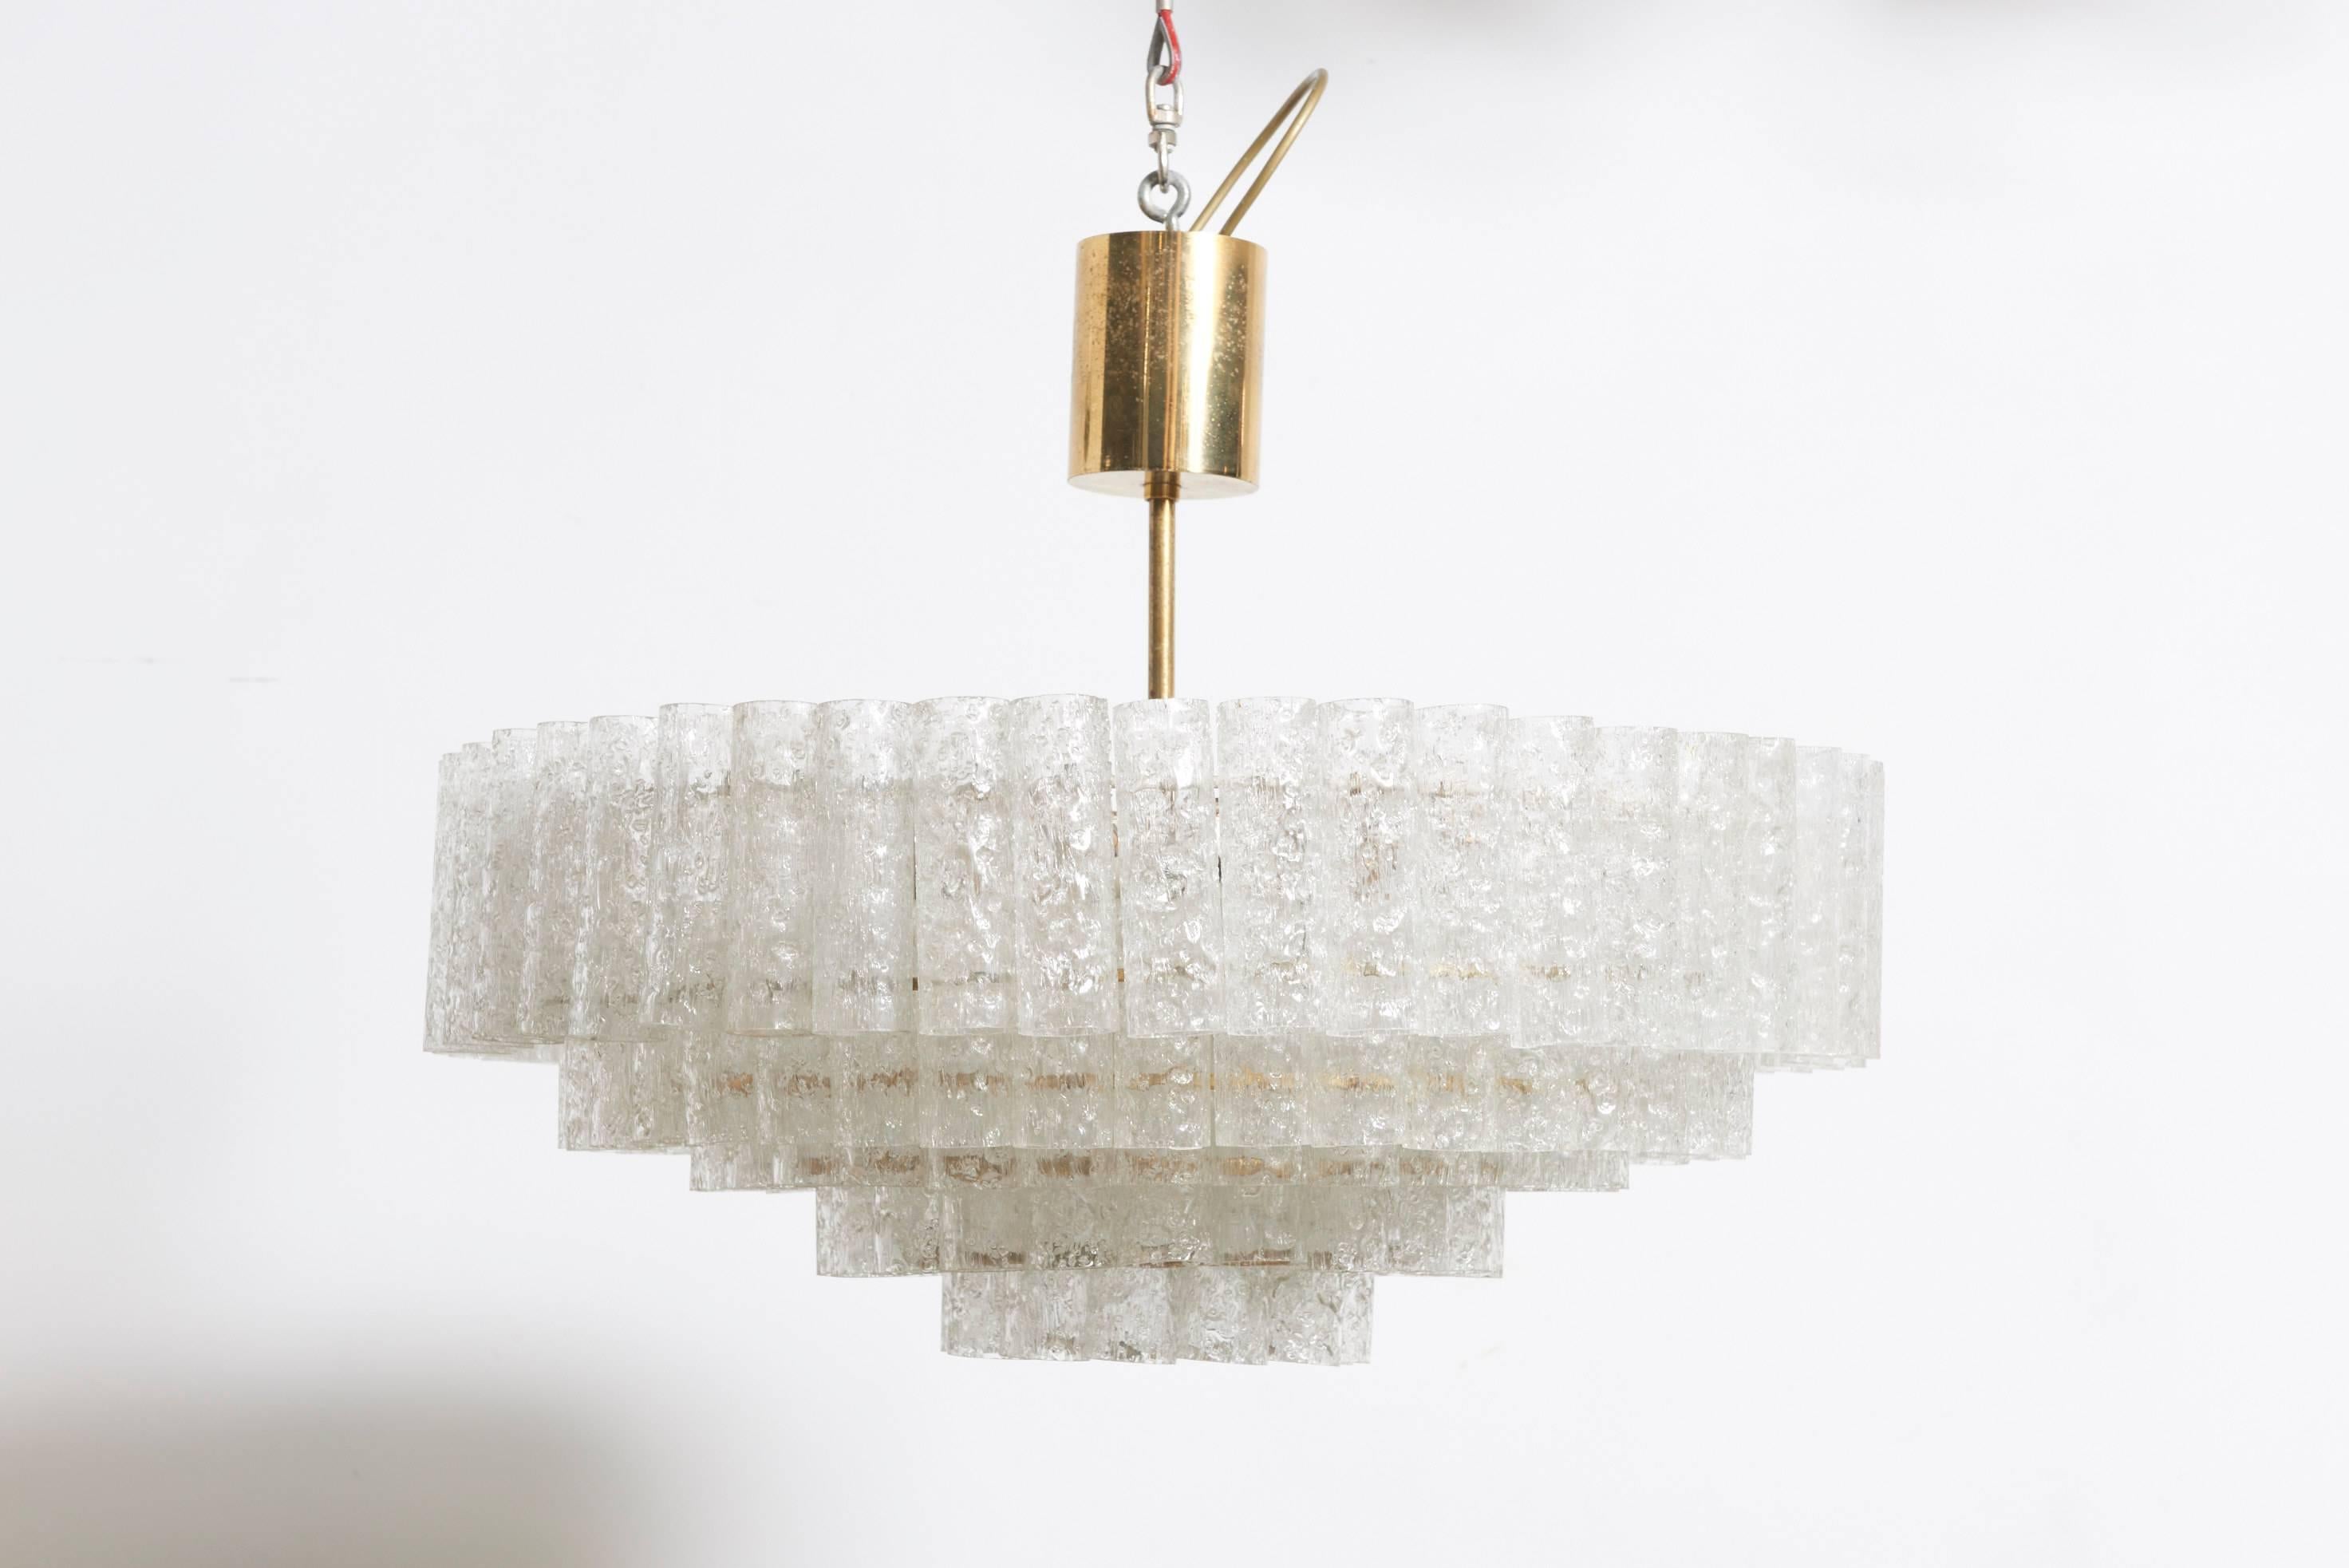 Large five tiers ice glass vintage chandelier with textured blown glass cylinders suspended on a frame in its original brass and white lacquer finish condition, labelled, by Doria, Germany, 1970s.